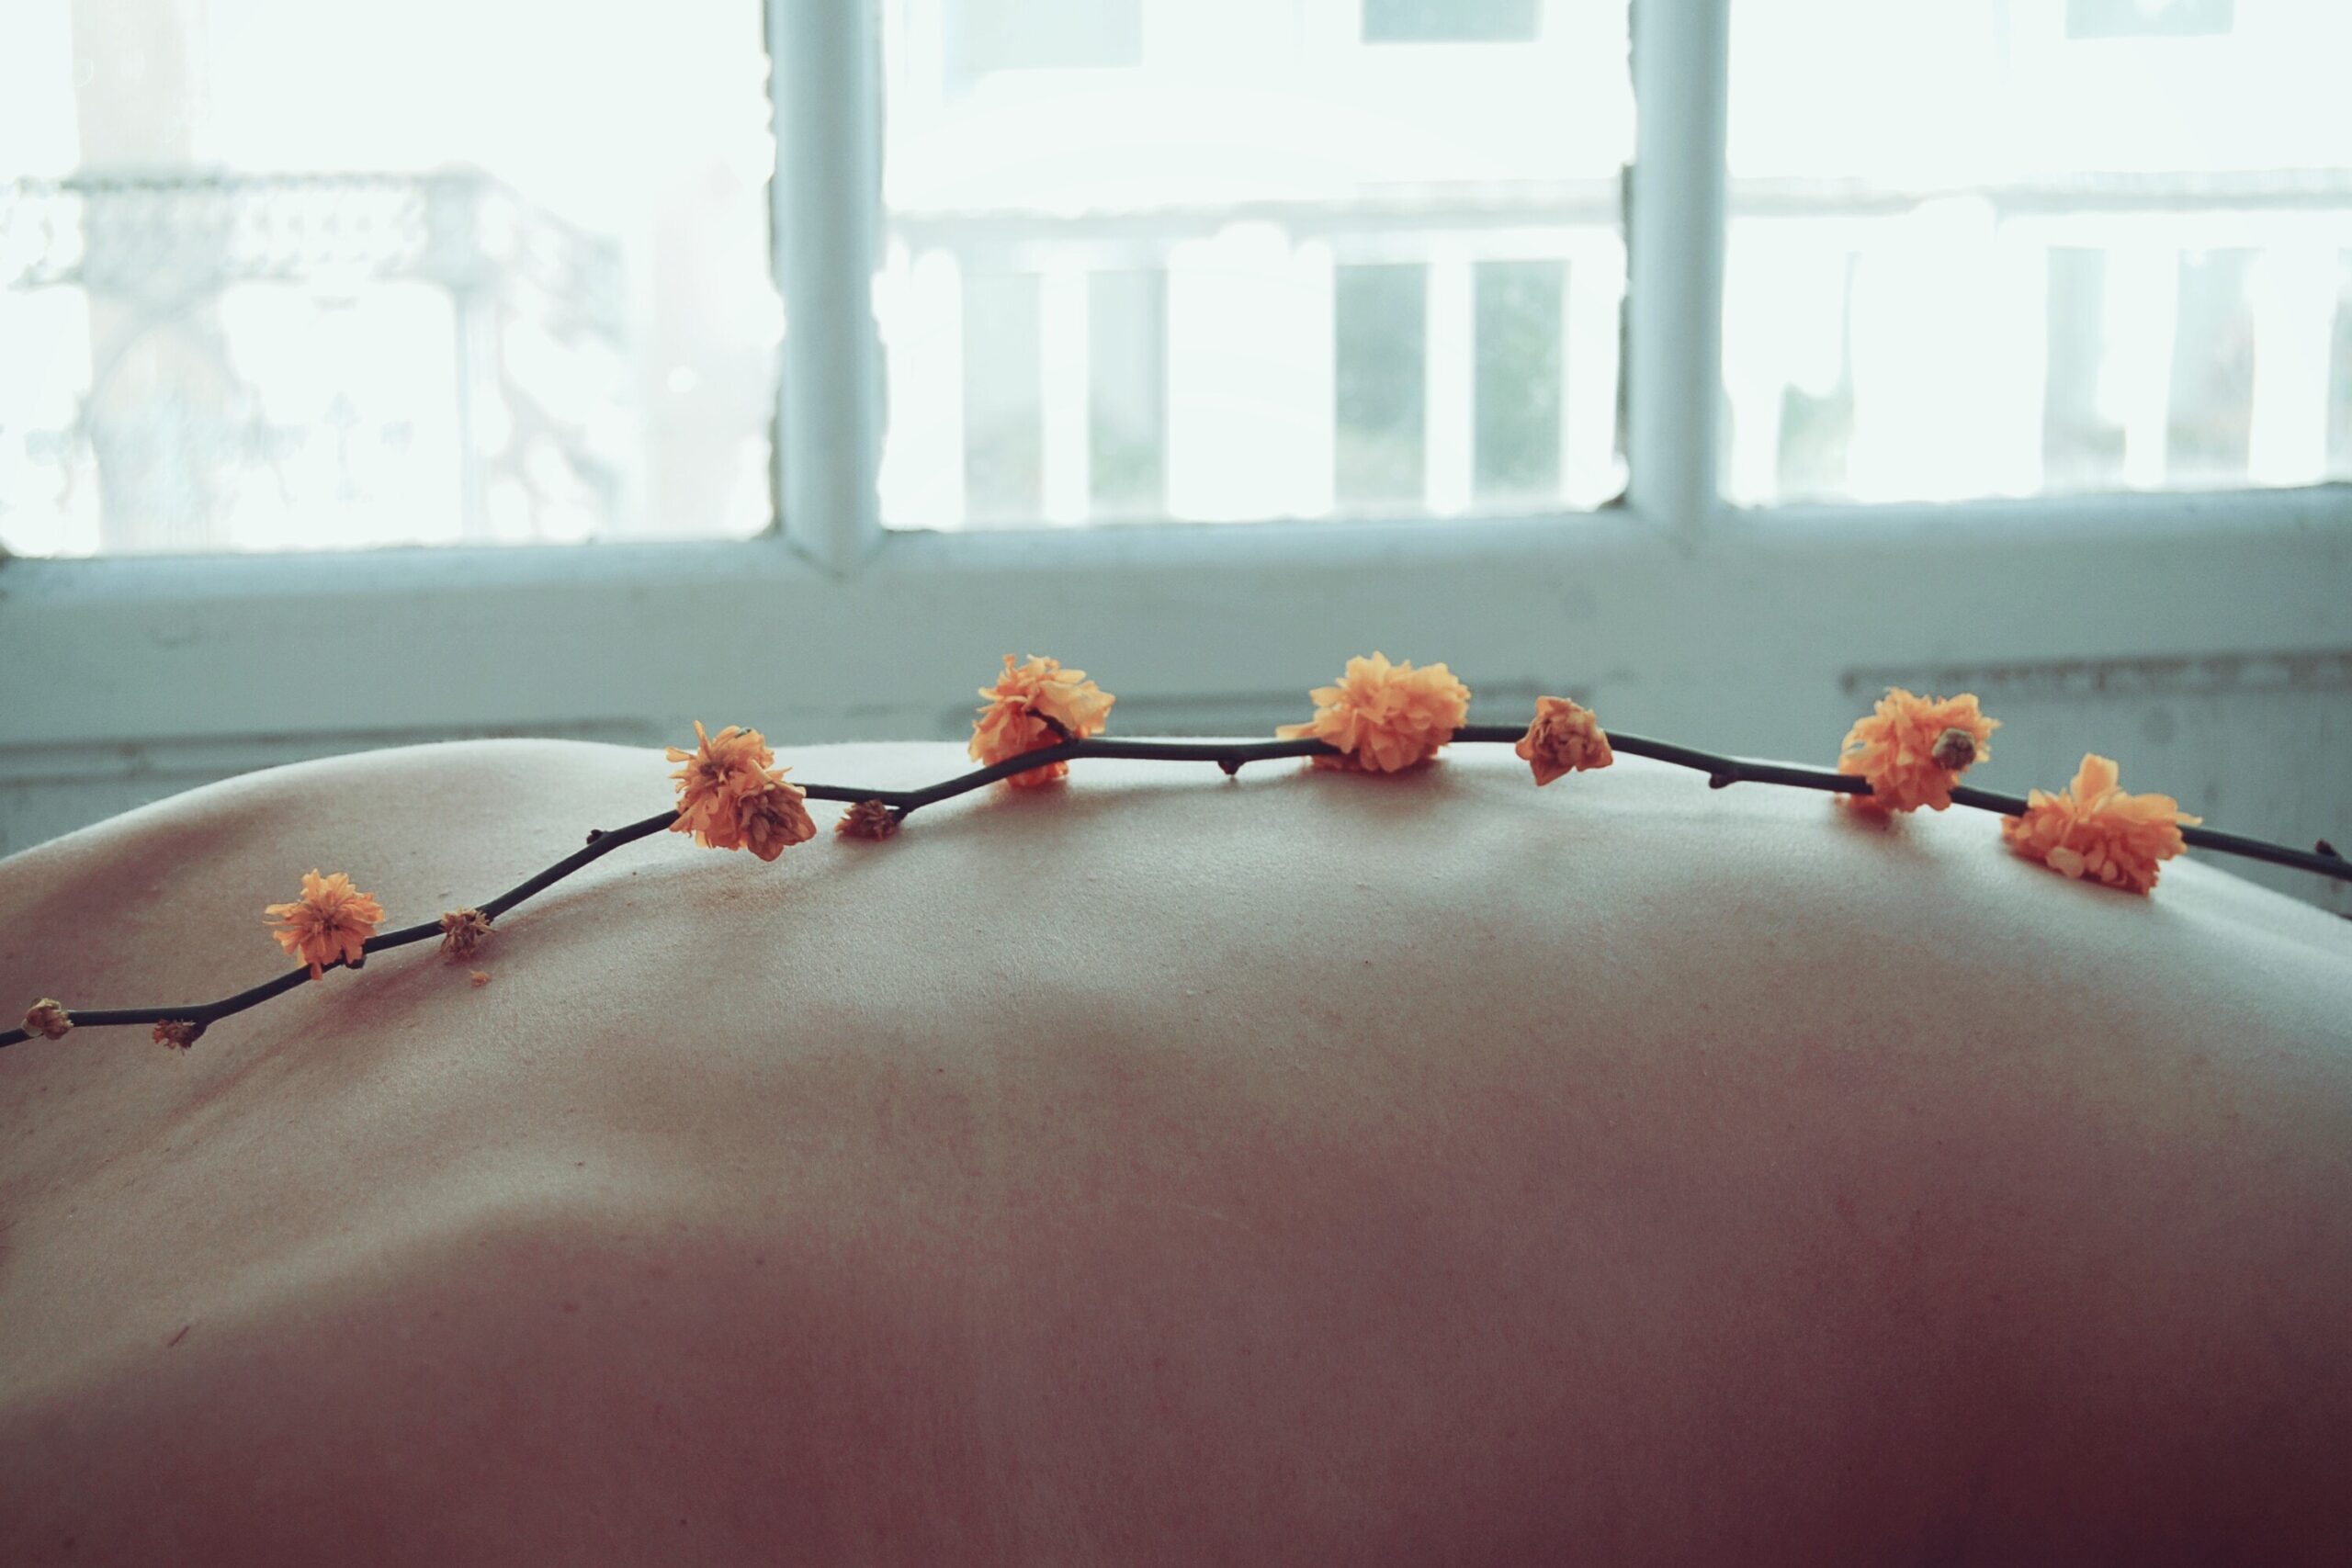 Photograph of a flowering twig lying on a person's bare back.